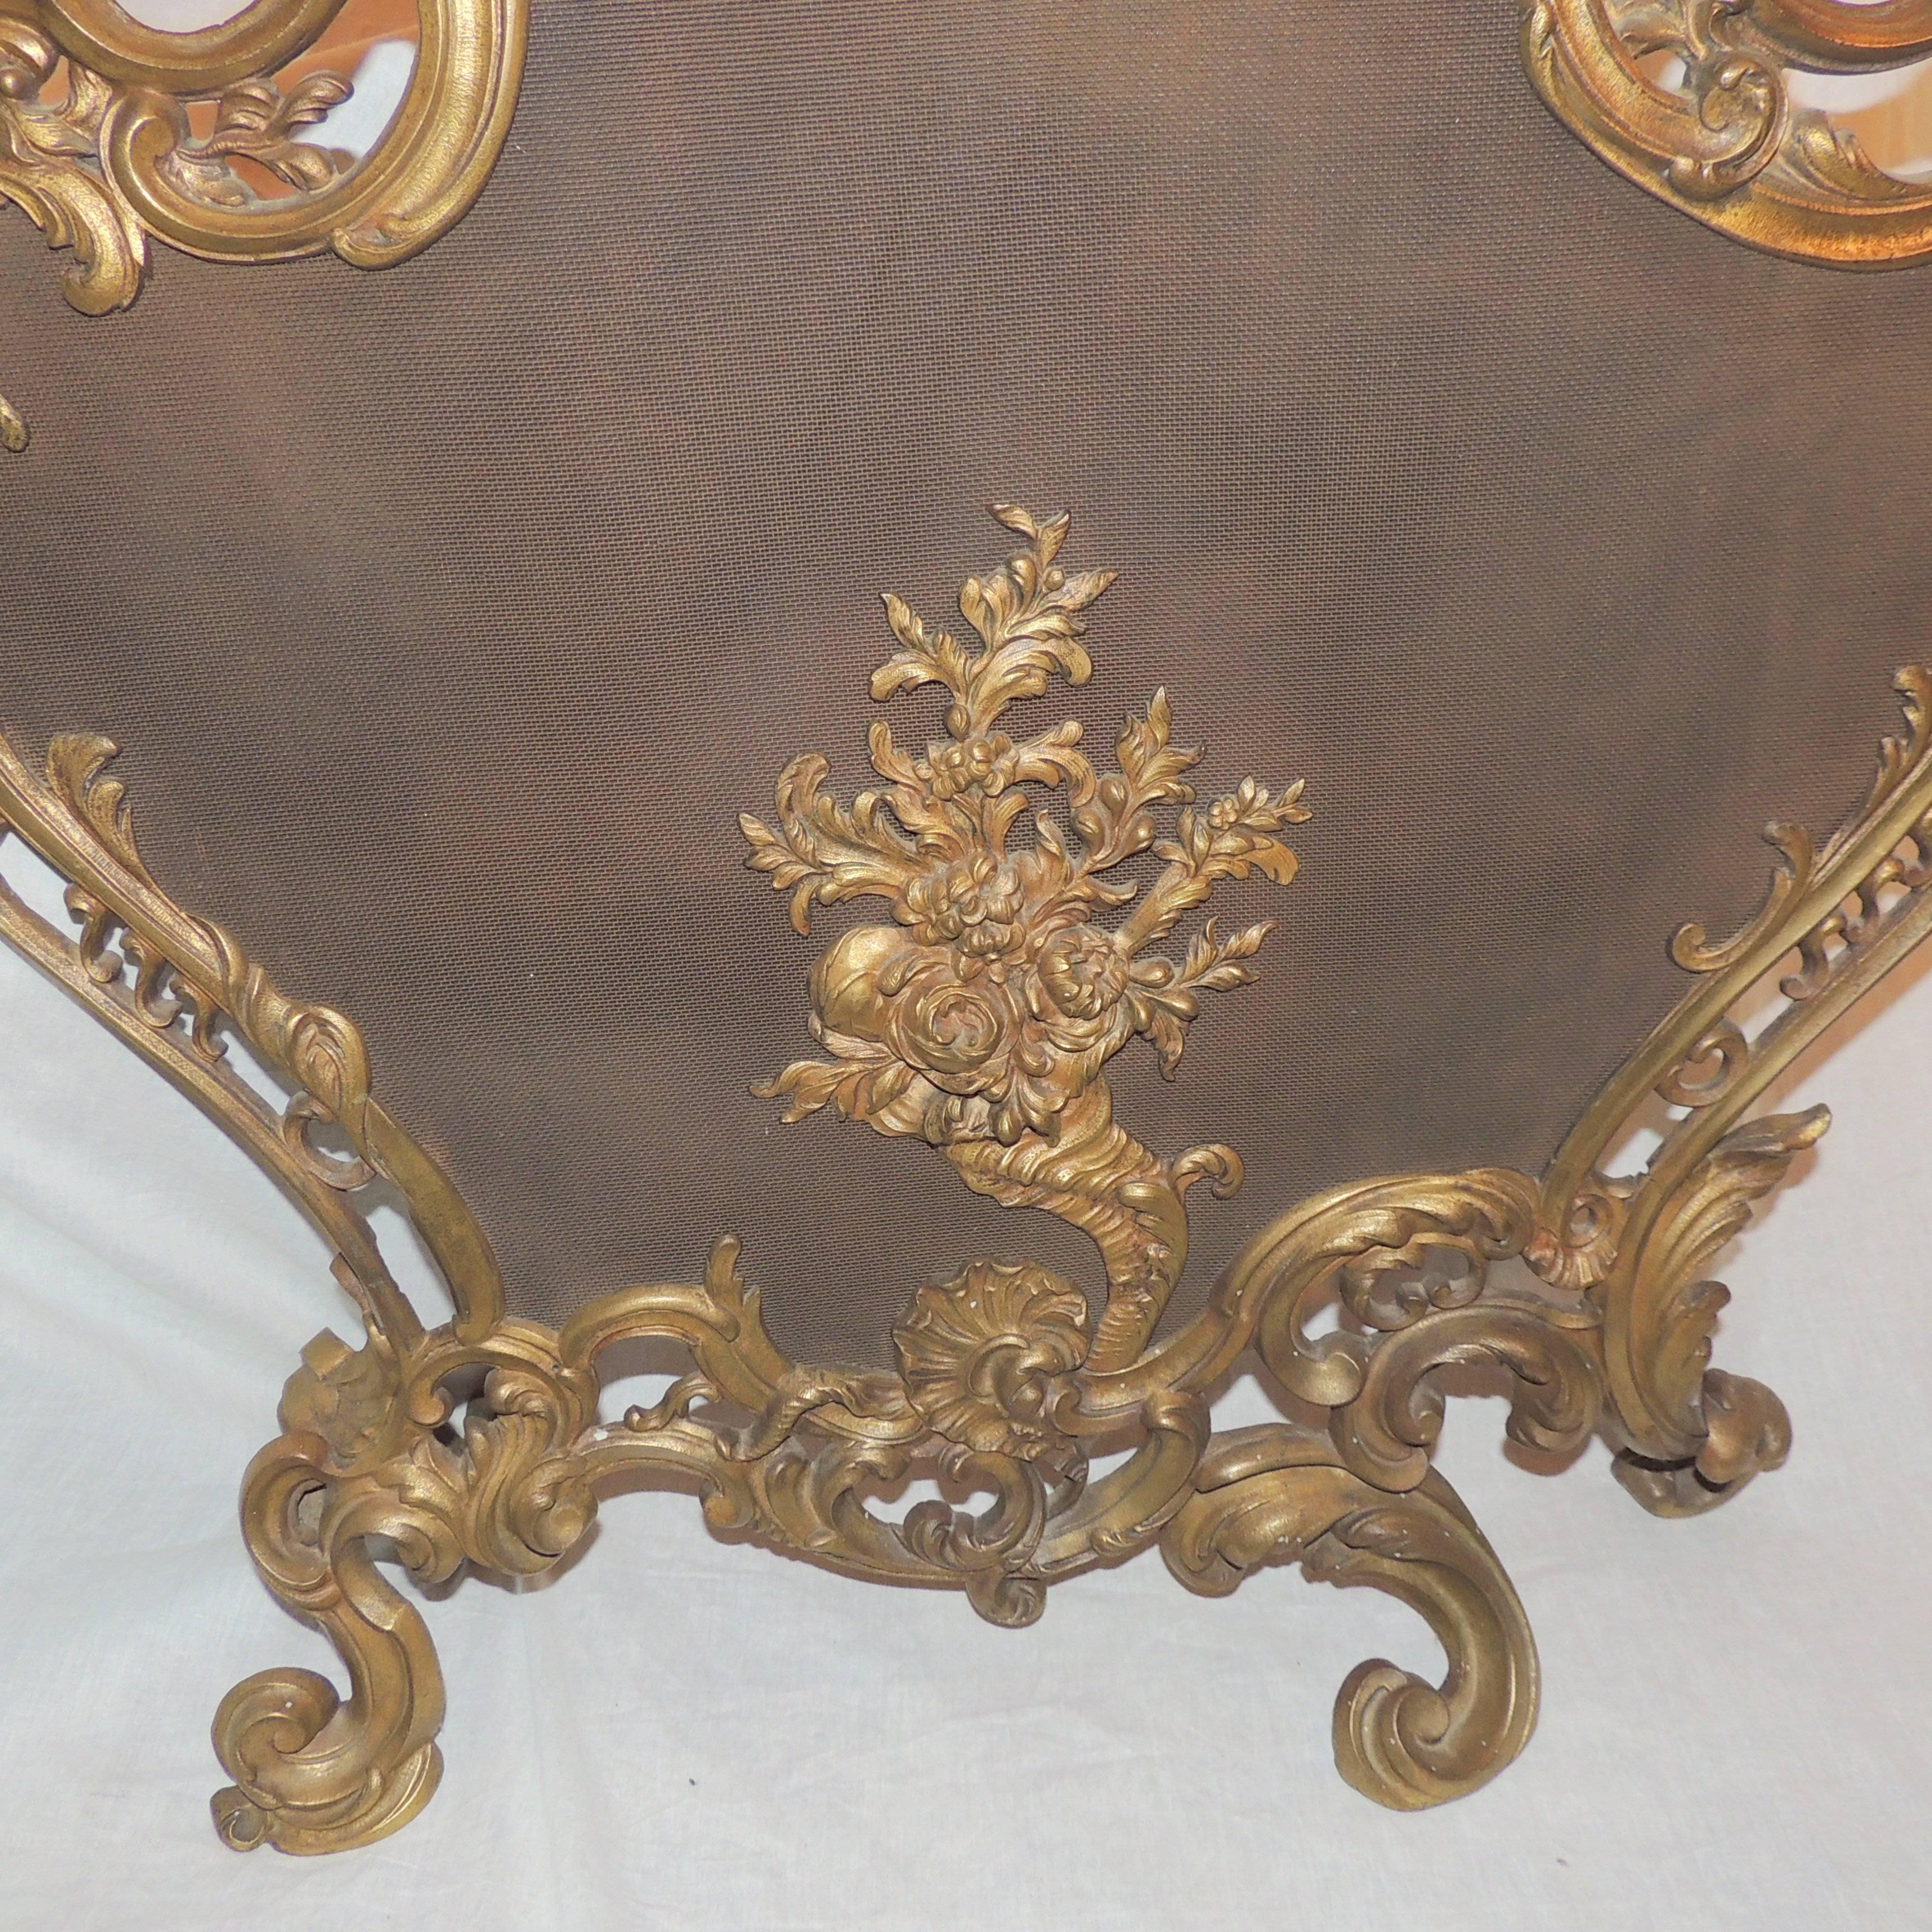 Extraordinary Dore Bronze Fire Place Screen Scrolls Floral Medallion Firescreen In Good Condition For Sale In Roslyn, NY